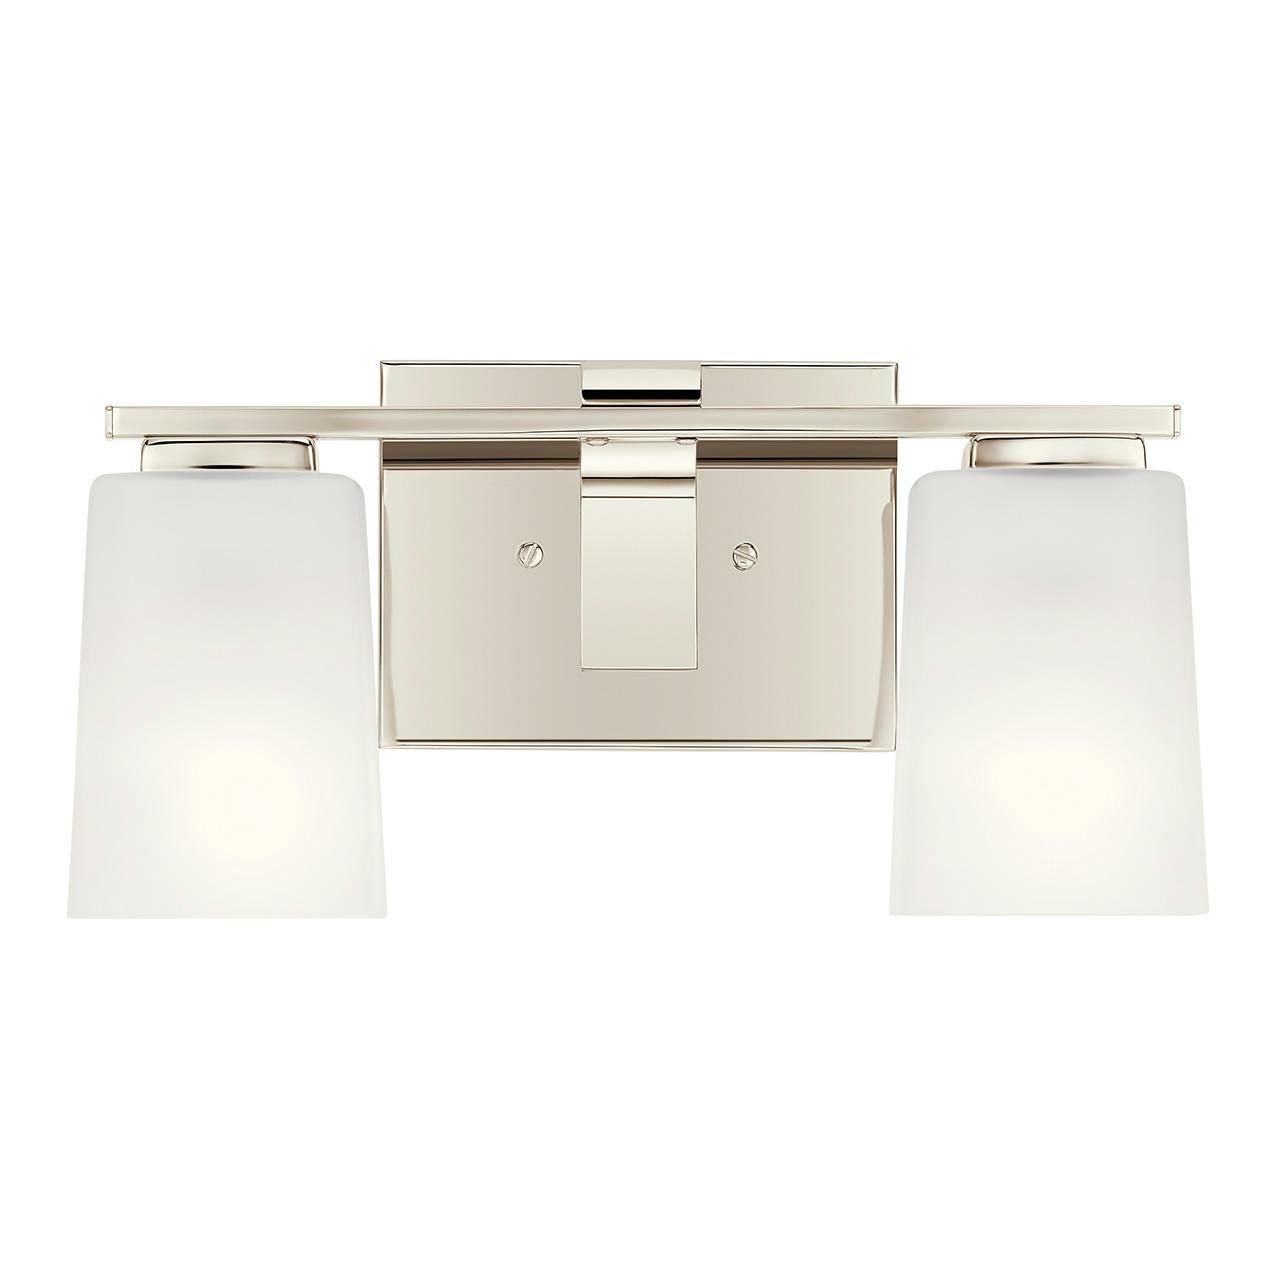 The Roehm 2 Light Vanity Light Nickel facing down on a white background